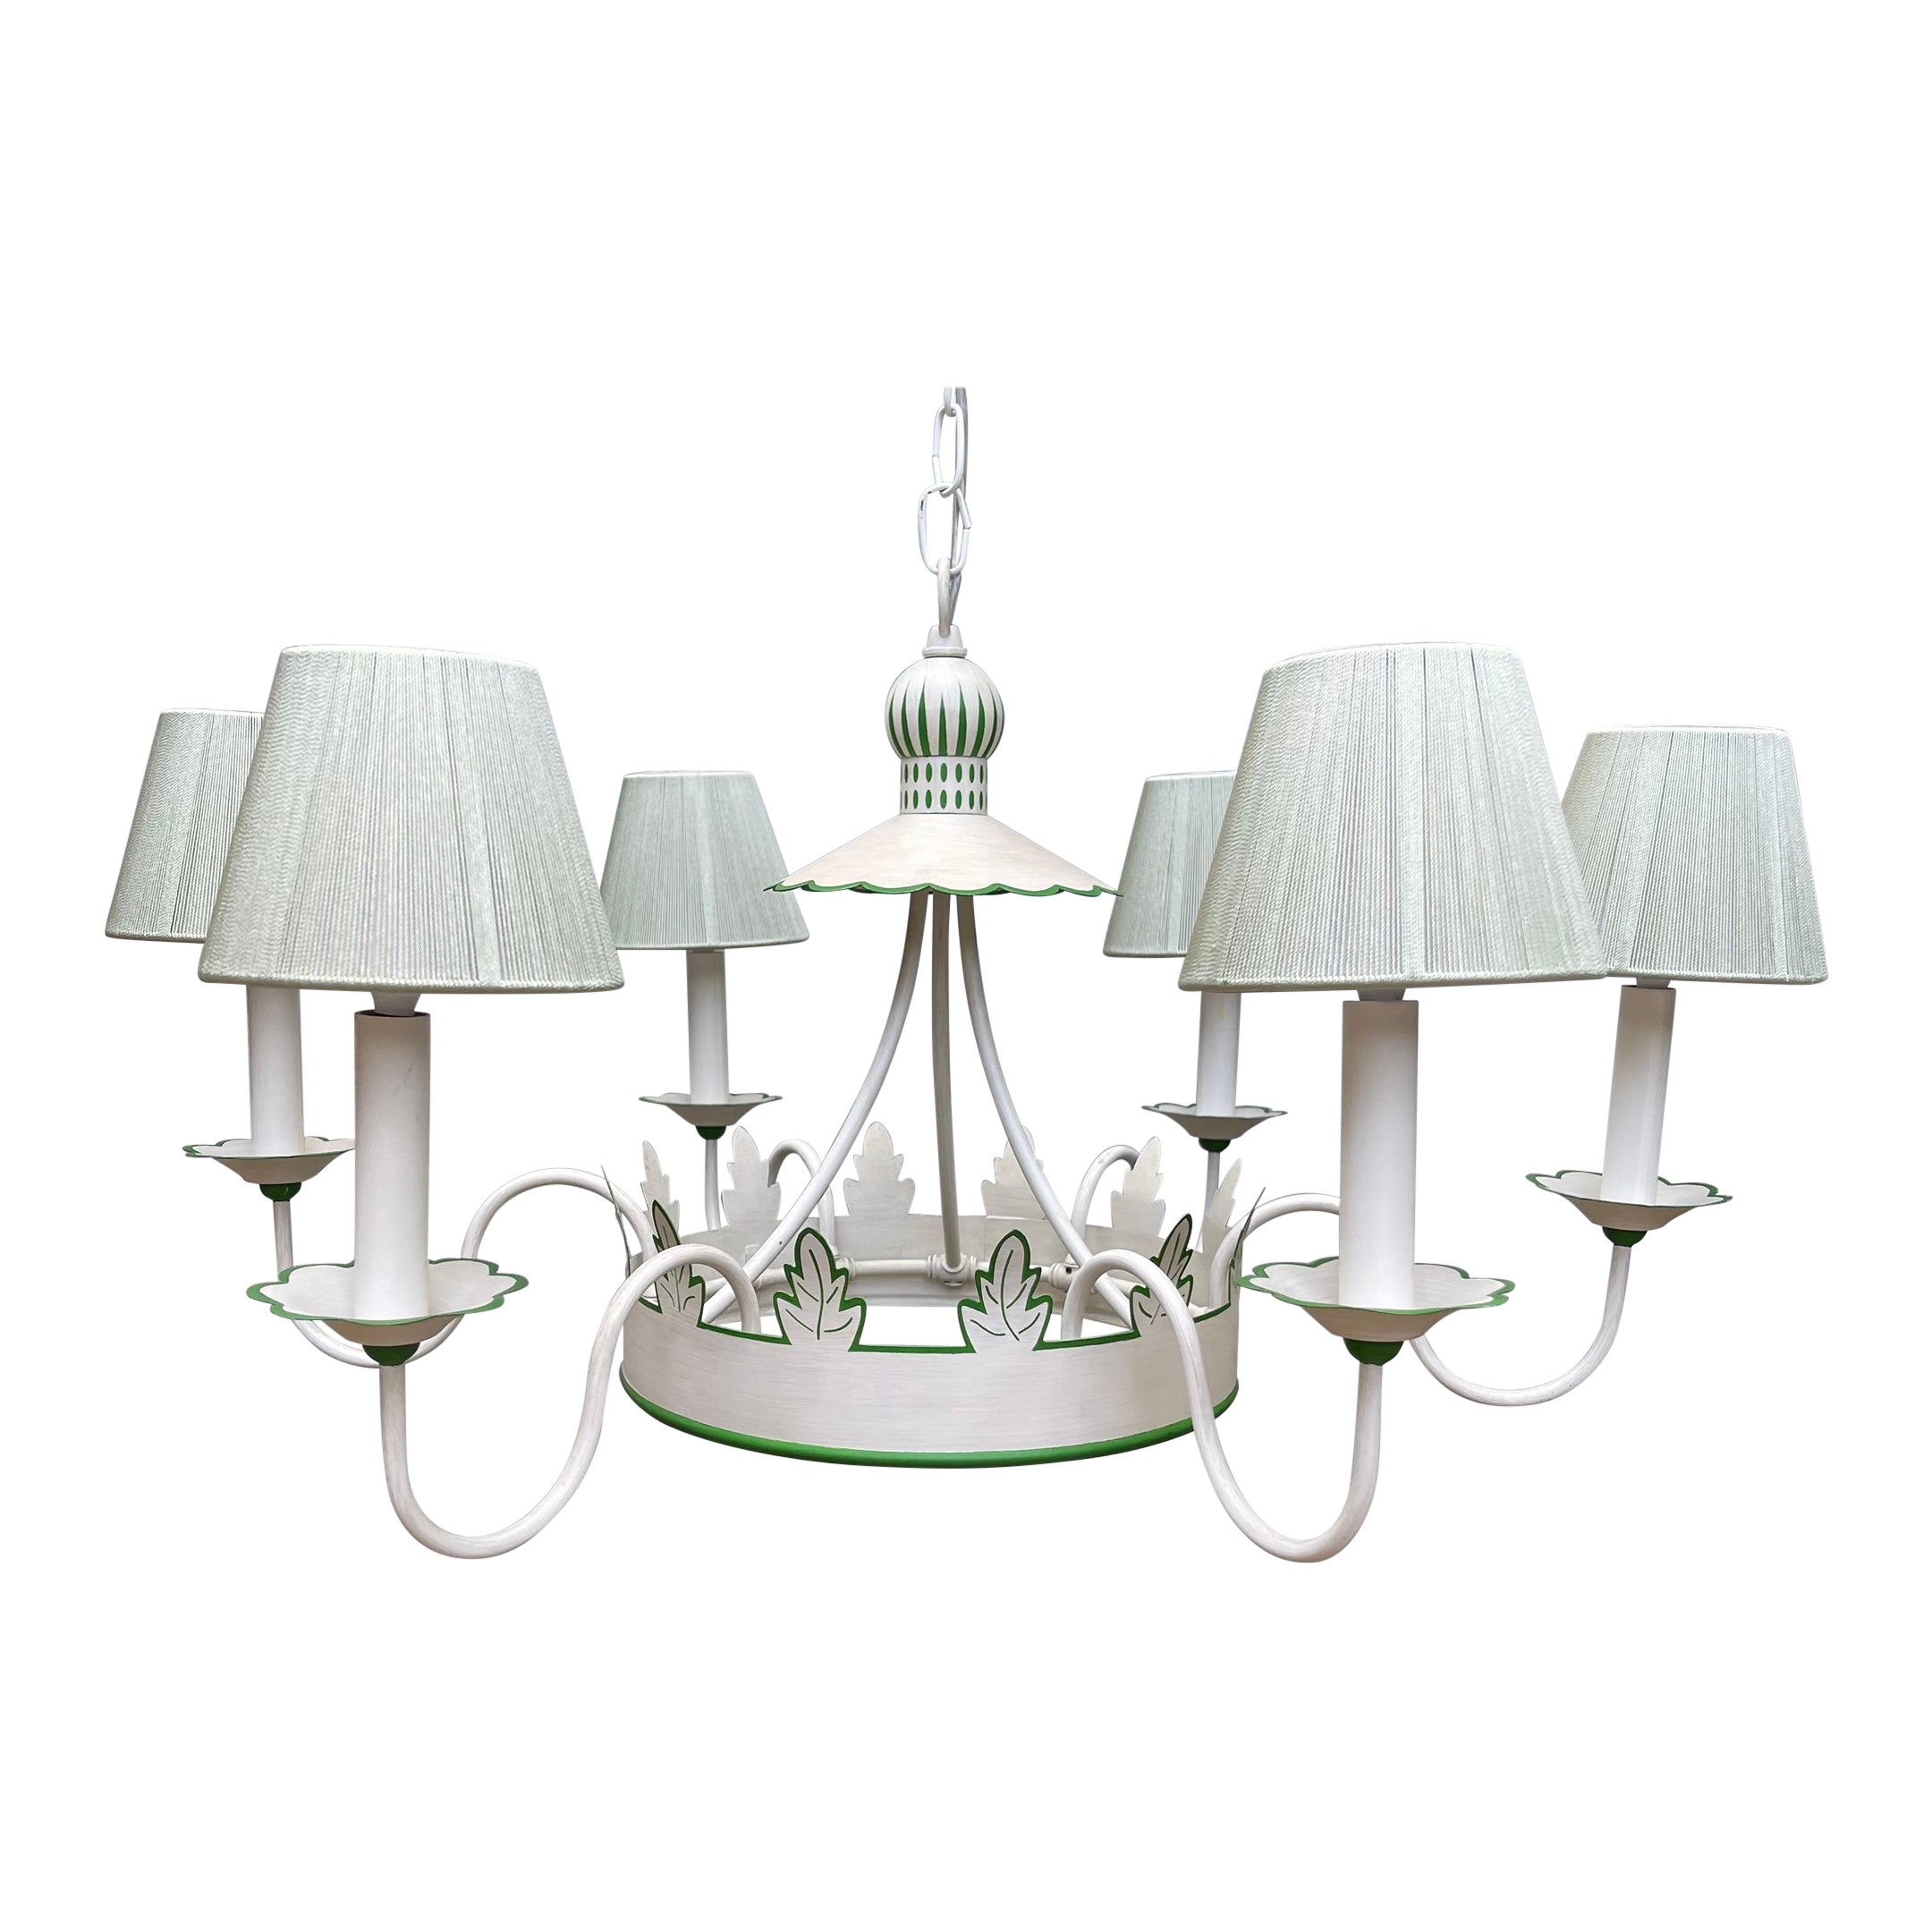 French Country Foliate 6 Light Painted Tole Chandelier, String Shades For Sale